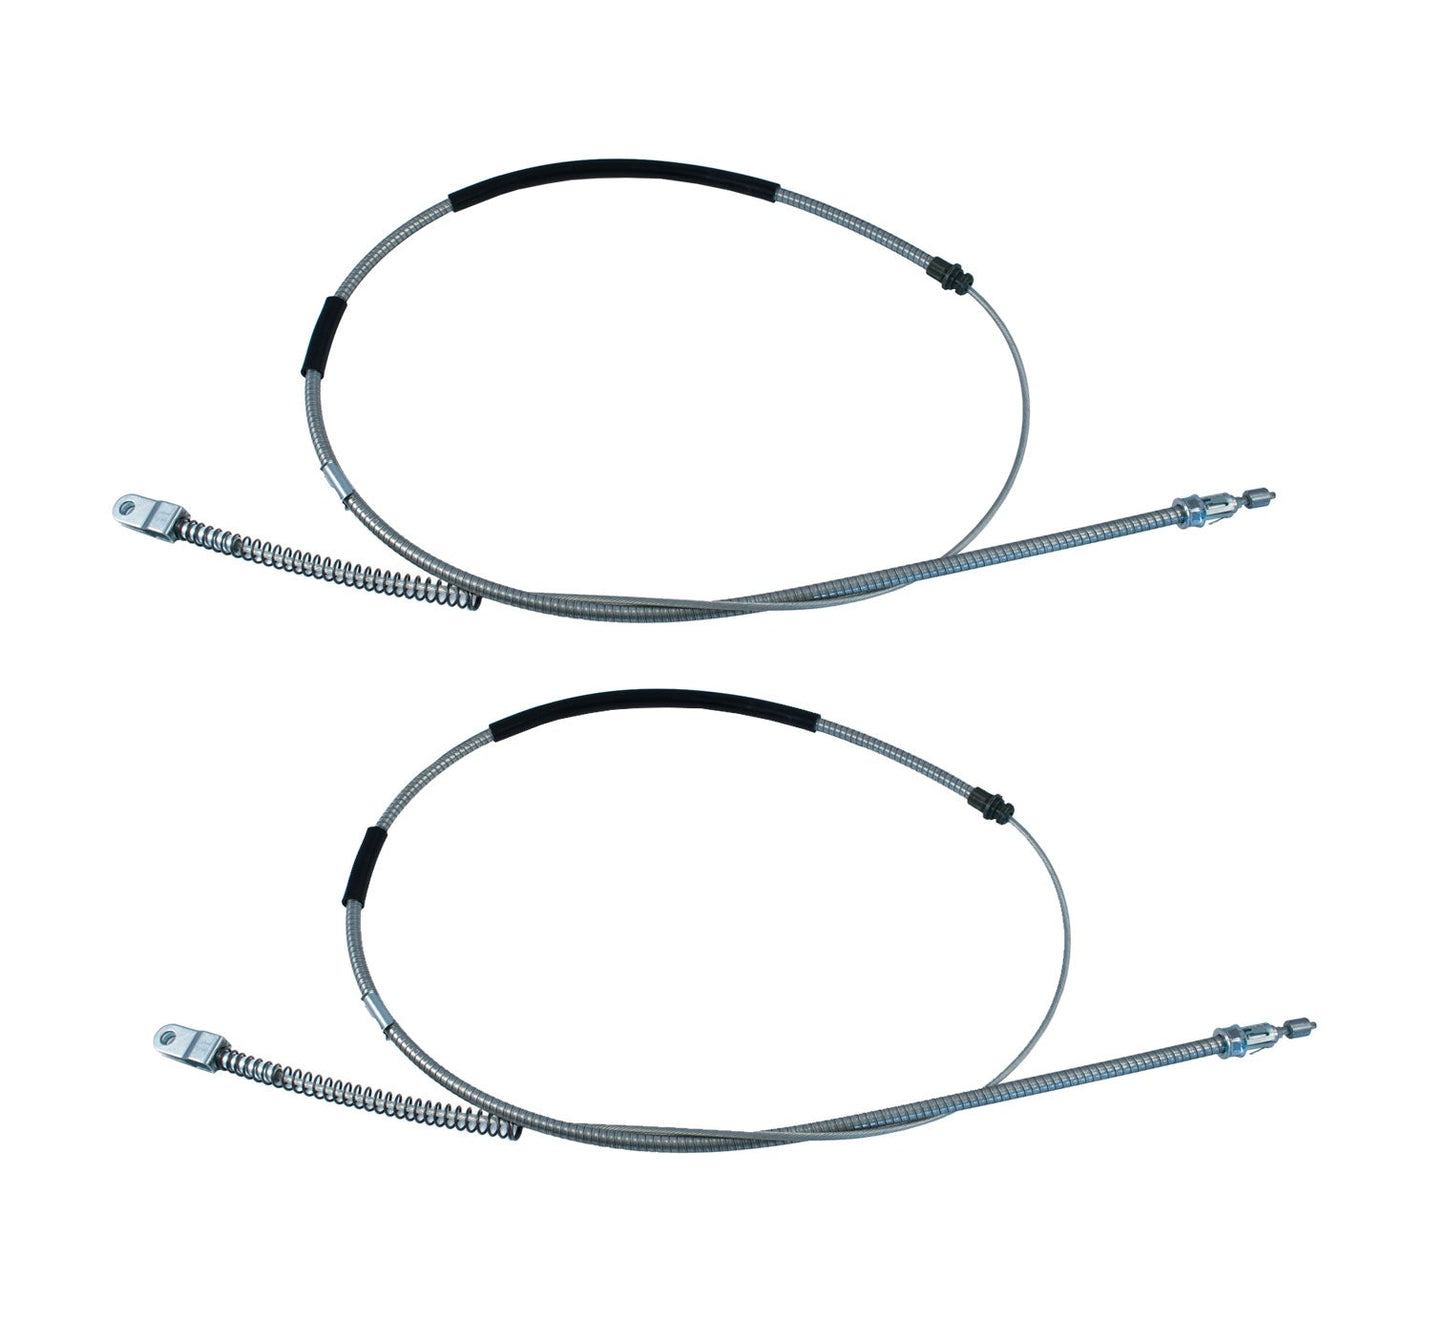 1984-1986 Ford Mustang SVO 70" Parking Emergency E-Brake Cables - Pair